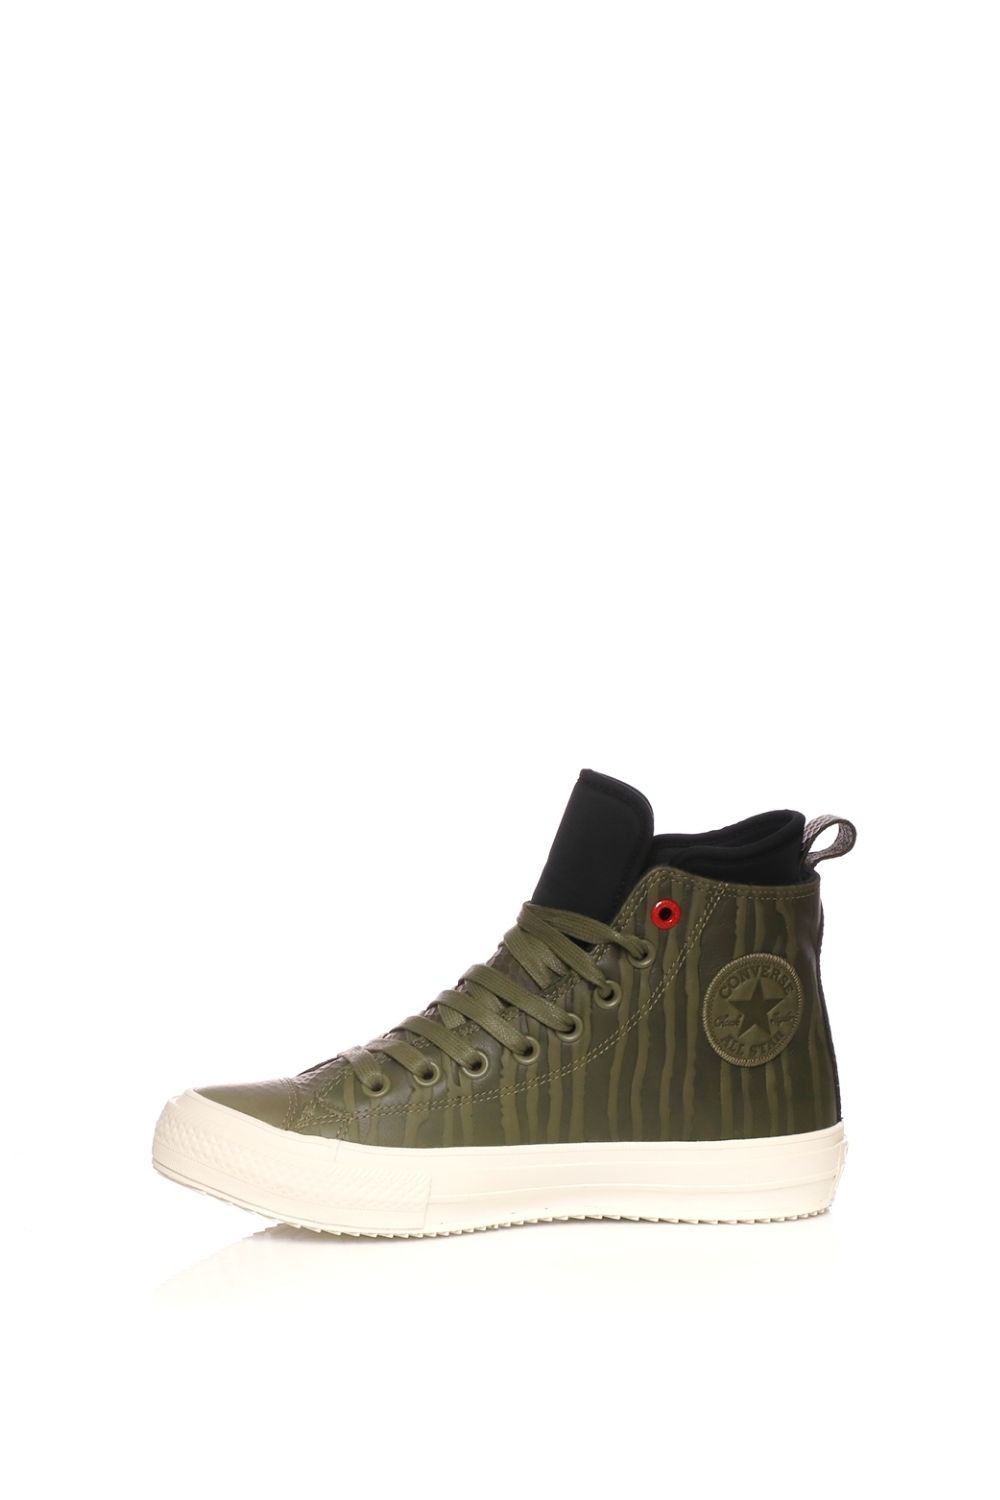 CONVERSE - Ανδρικά μποτάκια Converse Chuck Taylor AS WP Boot Hi χακί Ανδρικά/Παπούτσια/Sneakers